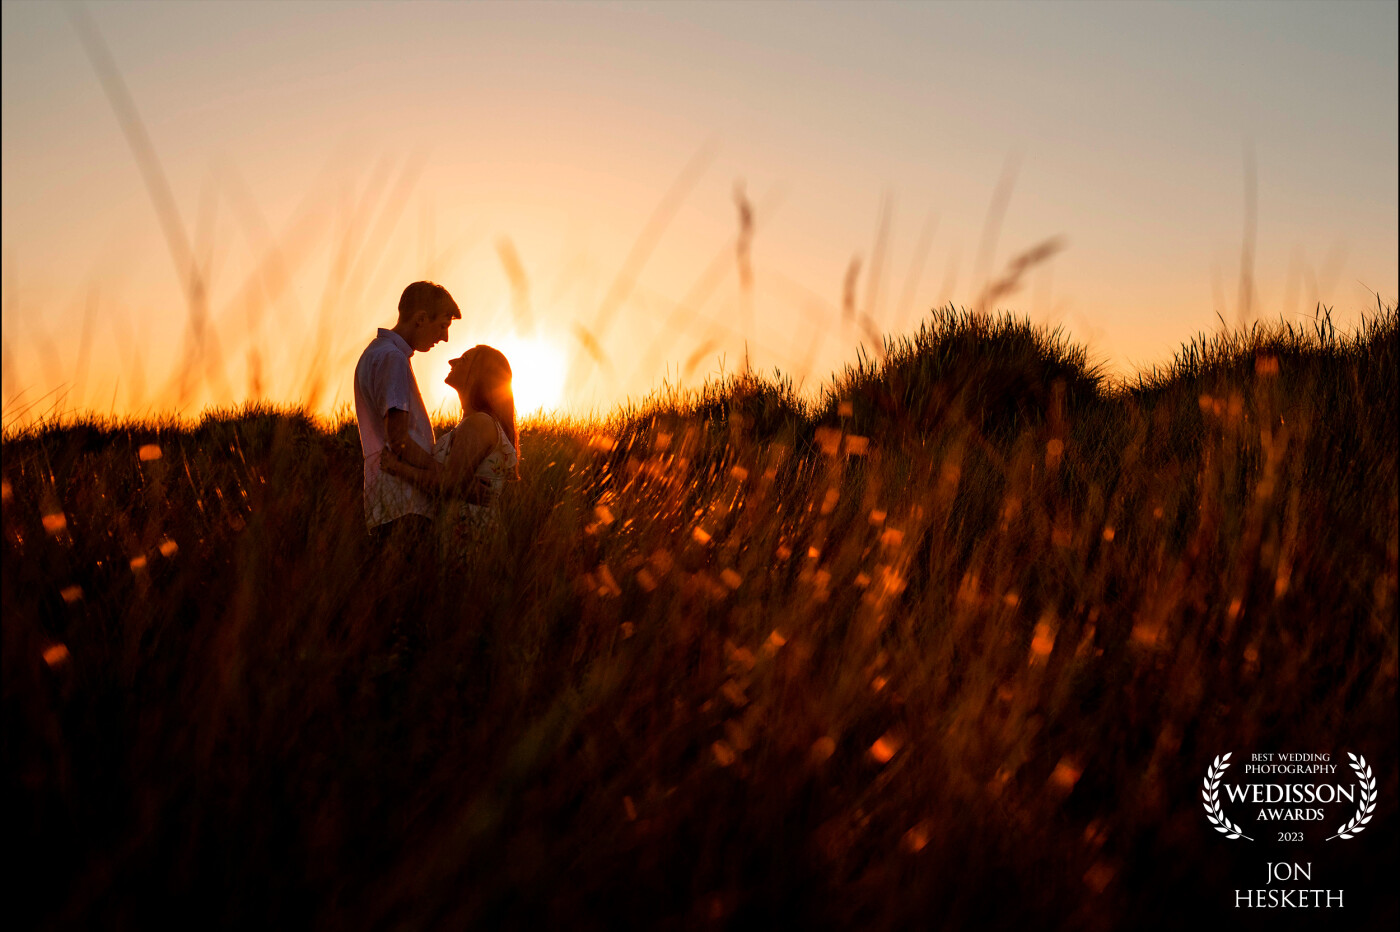 Talacre Beach had been amazing for me this year for sunset shoots, with the sun setting I placed my couple in-front of the sun and the light bounced beautifully off the long grass.